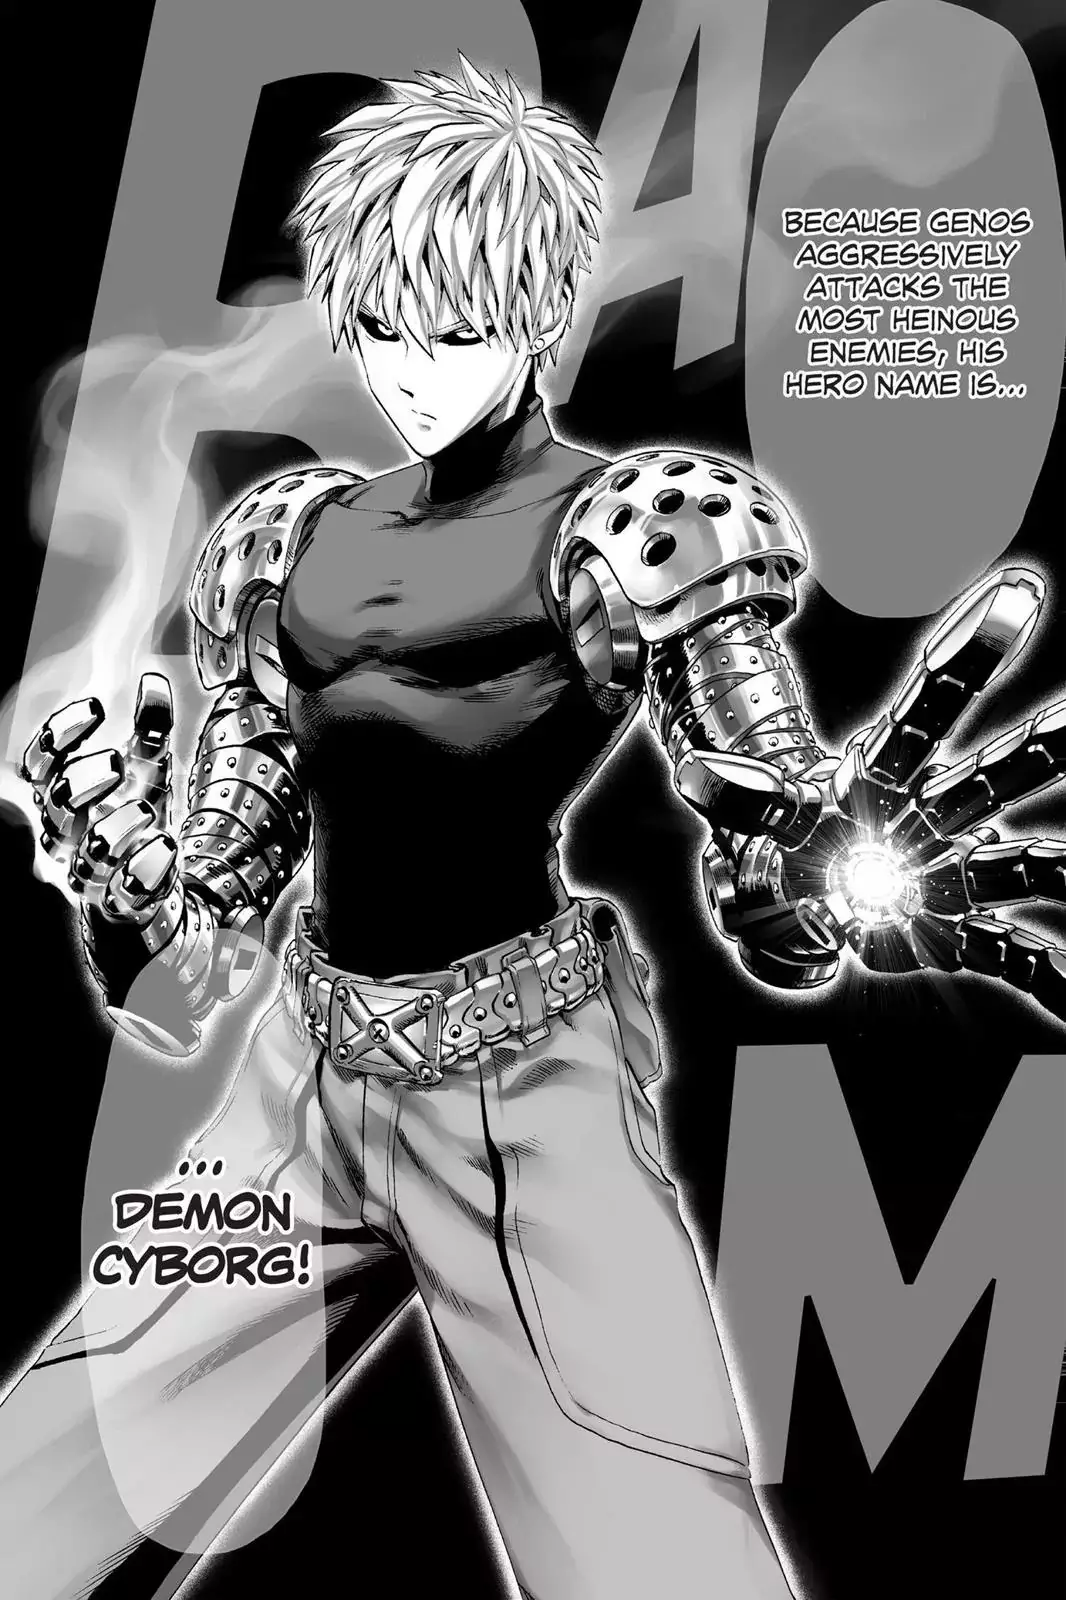 One Punch Man Chapter 45, READ One Punch Man Chapter 45 ONLINE, lost in the cloud genre,lost in the cloud gif,lost in the cloud girl,lost in the cloud goods,lost in the cloud goodreads,lost in the cloud,lost ark cloud gaming,lost odyssey cloud gaming,lost in the cloud fanart,lost in the cloud fanfic,lost in the cloud fandom,lost in the cloud first kiss,lost in the cloud font,lost in the cloud ending,lost in the cloud episode 97,lost in the cloud edit,lost in the cloud explained,lost in the cloud dog,lost in the cloud discord server,lost in the cloud desktop wallpaper,lost in the cloud drawing,can't find my cloud on network,lost in the cloud characters,lost in the cloud chapter 93 release date,lost in the cloud birthday,lost in the cloud birthday art,lost in the cloud background,lost in the cloud banner,lost in the clouds meaning,what is the black cloud in lost,lost in the cloud ao3,lost in the cloud anime,lost in the cloud art,lost in the cloud author twitter,lost in the cloud author instagram,lost in the cloud artist,lost in the cloud acrylic stand,lost in the cloud artist twitter,lost in the cloud art style,lost in the cloud analysis